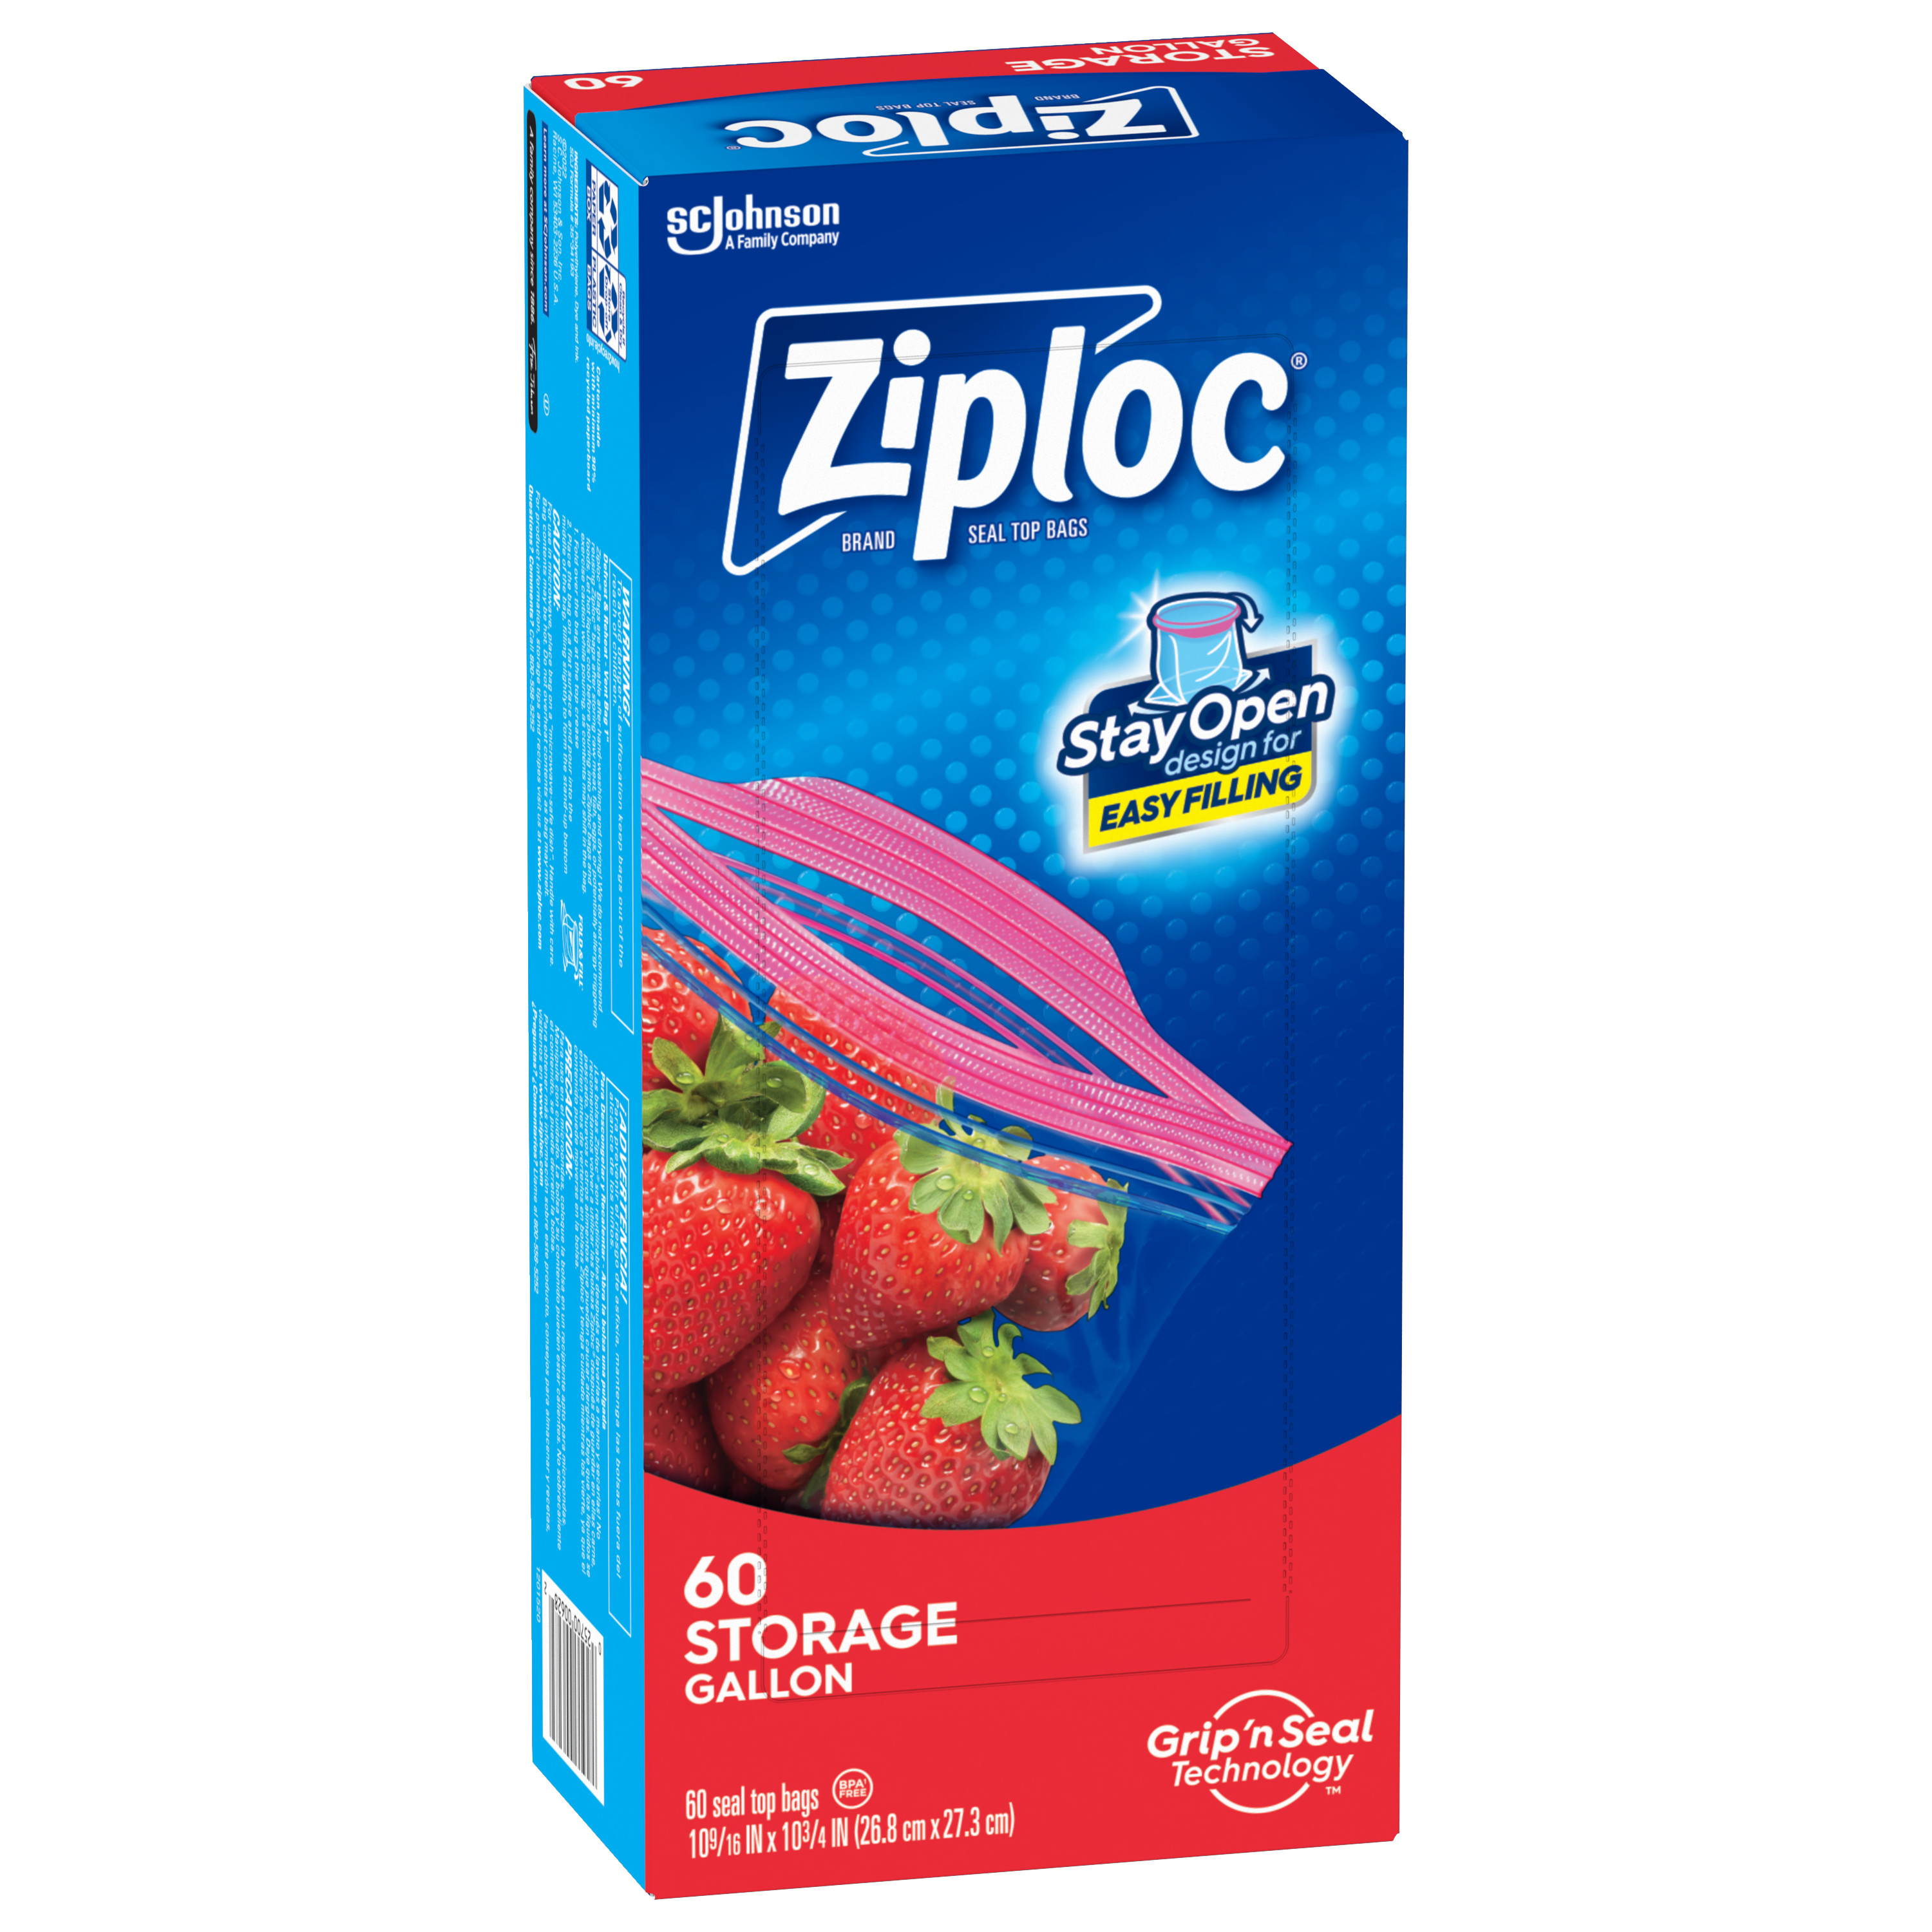 Ziploc® Brand Gallon Storage Bags with Stay Open Technology, 60 Count - image 16 of 19